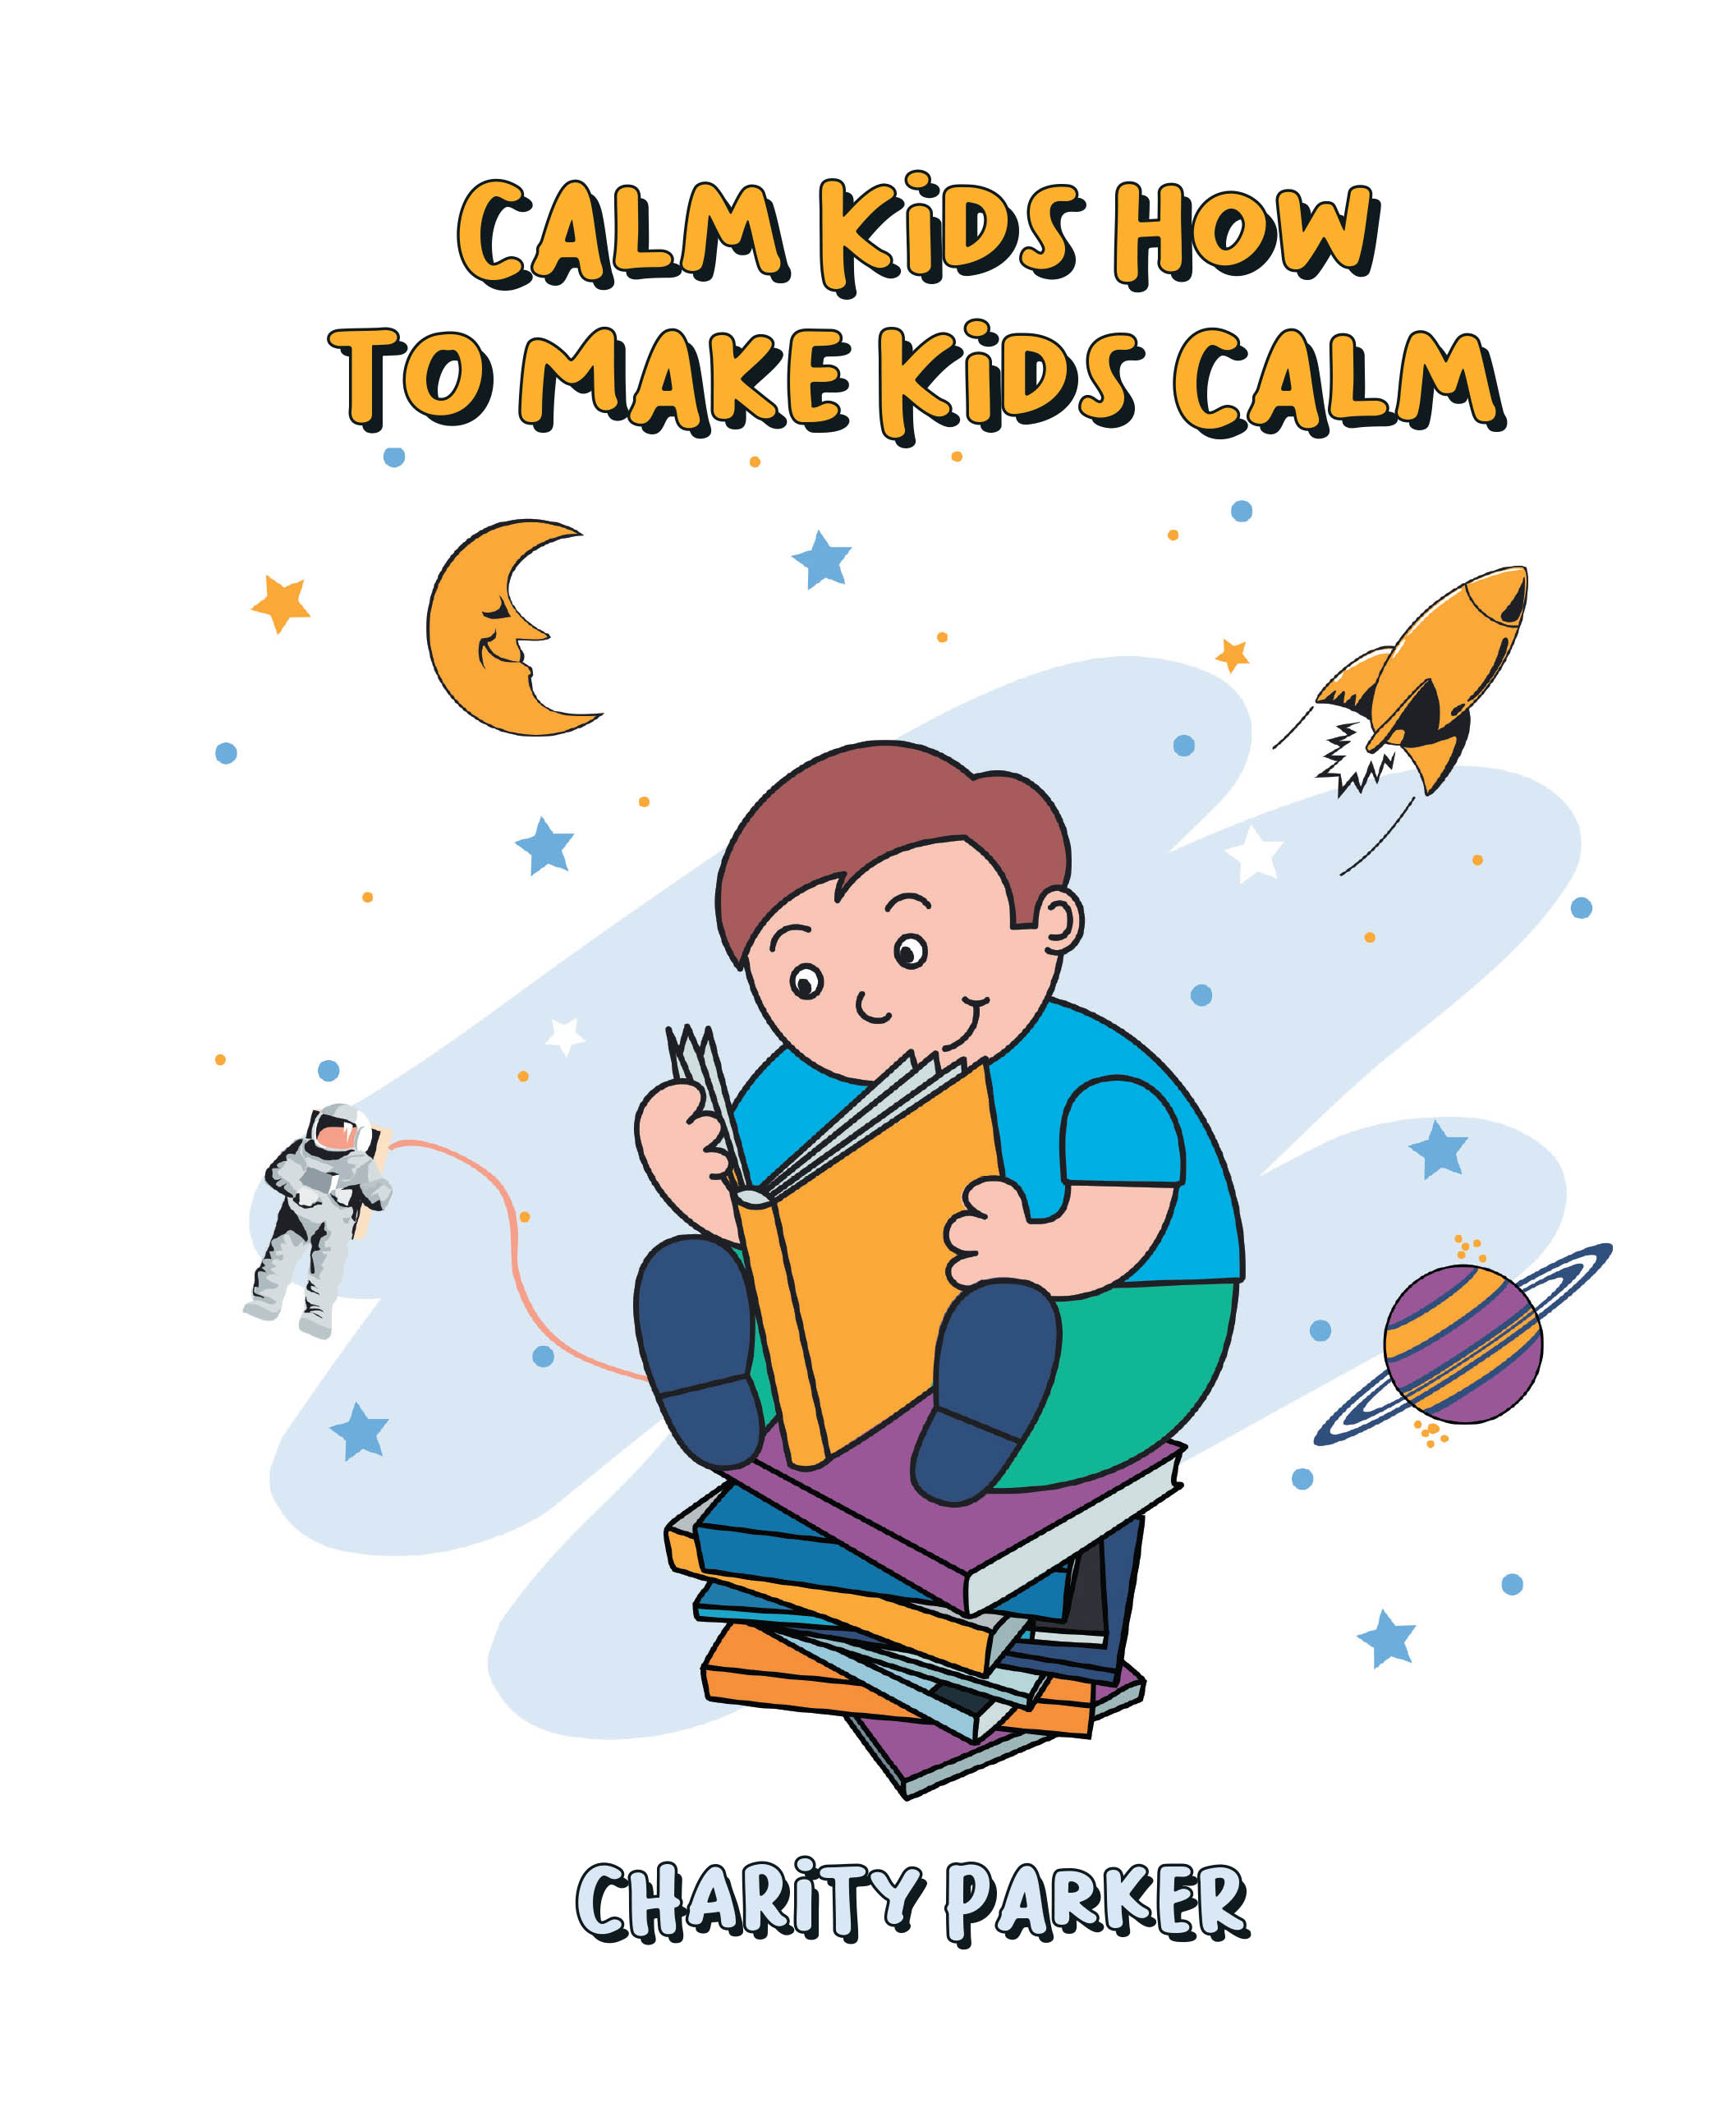 Author Charity Parker’s New Book, "Calm Kids: How to Make Kids Calm," Follows a Young Boy Who Discovers the Building Blocks to Develop Emotional Management Skills